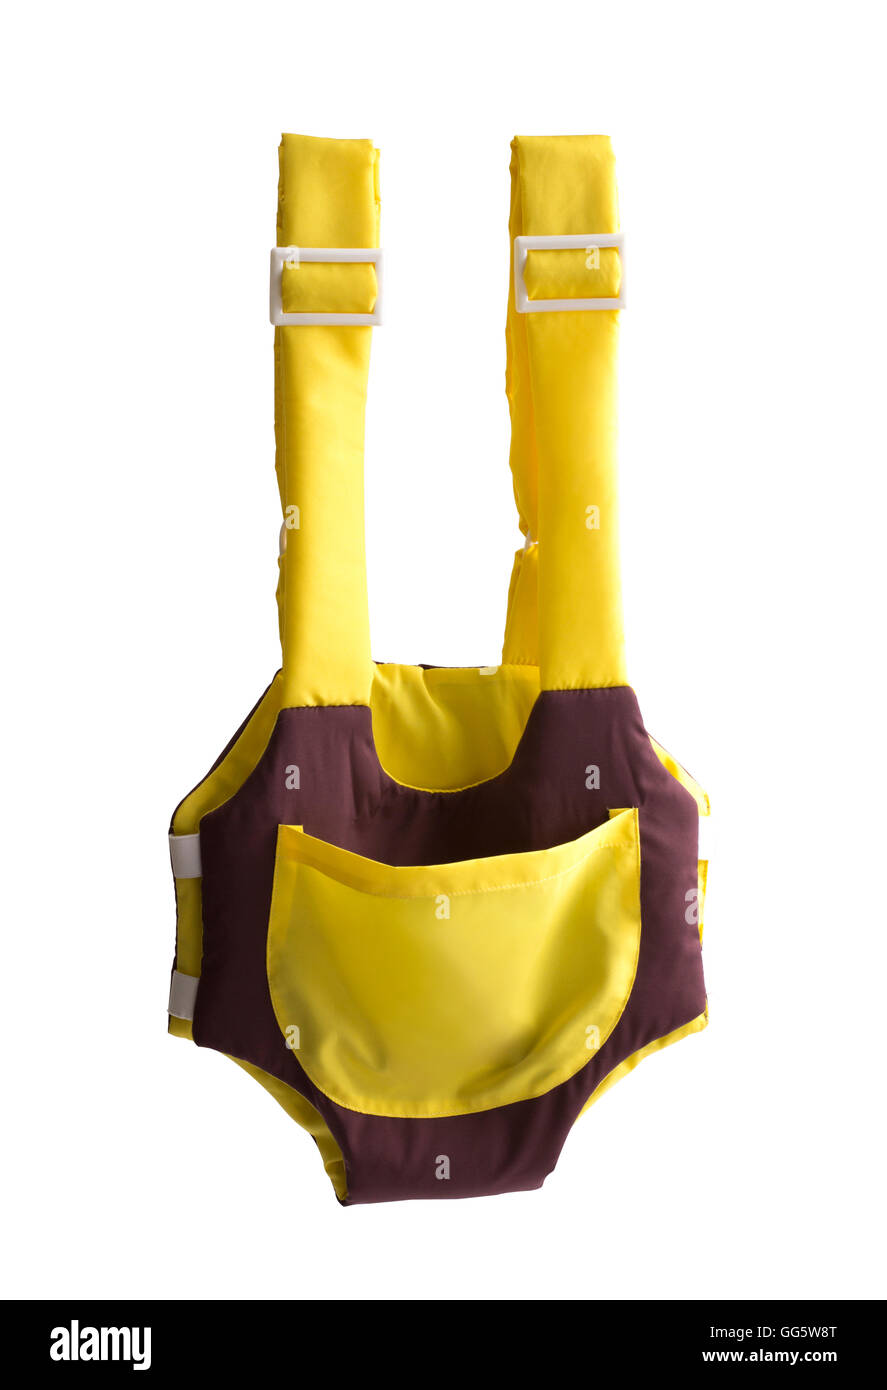 cute yellow and brown baby carrier isolated on white background Stock Photo